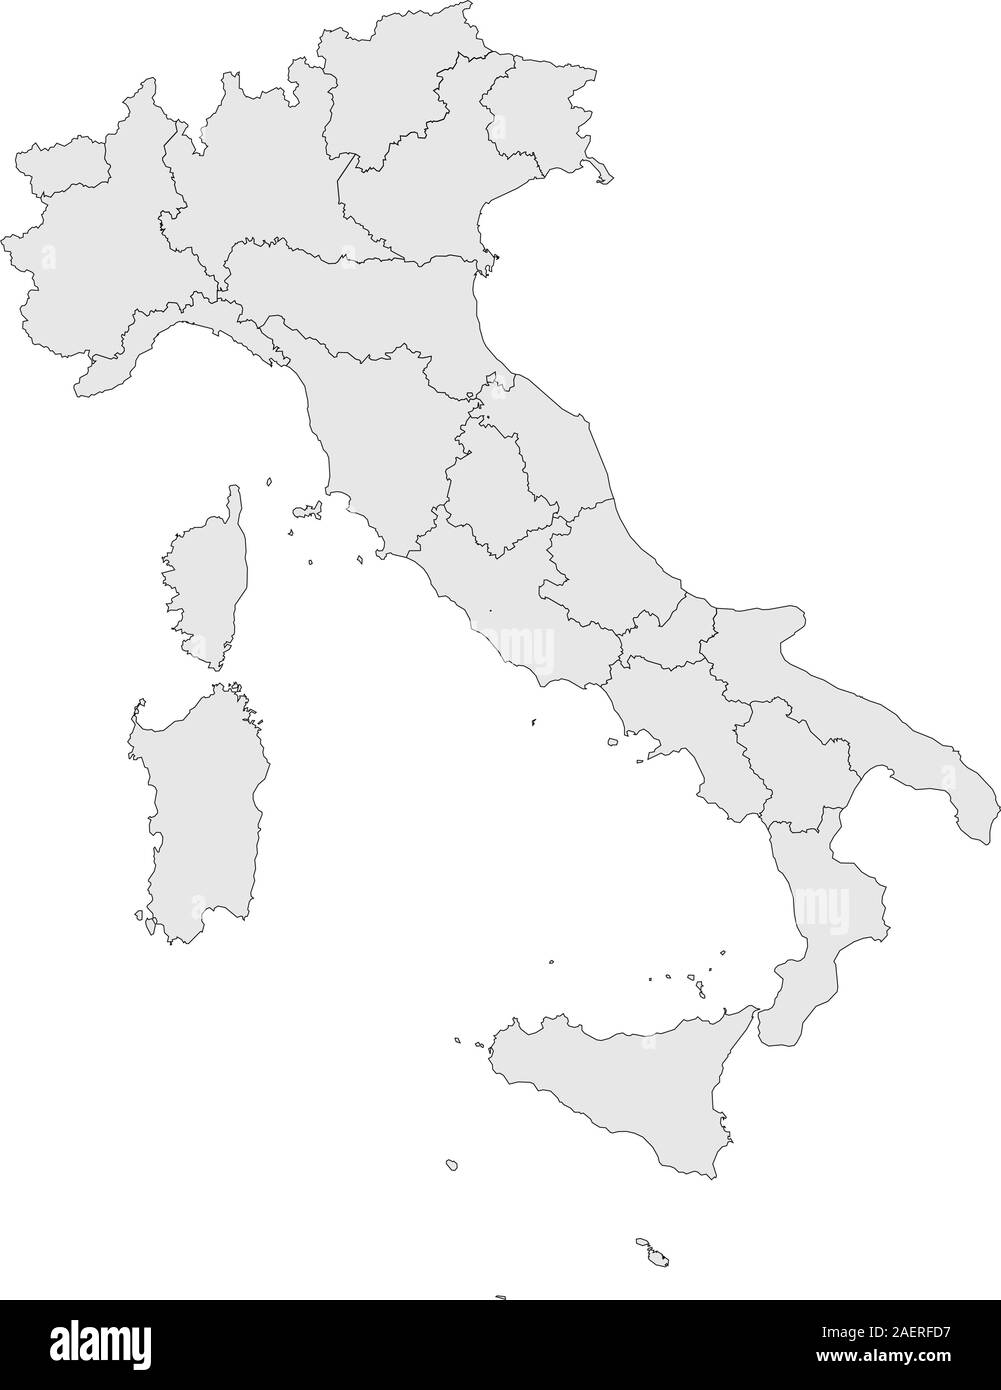 Italy political map vector illustration. Light gray color. Stock Vector